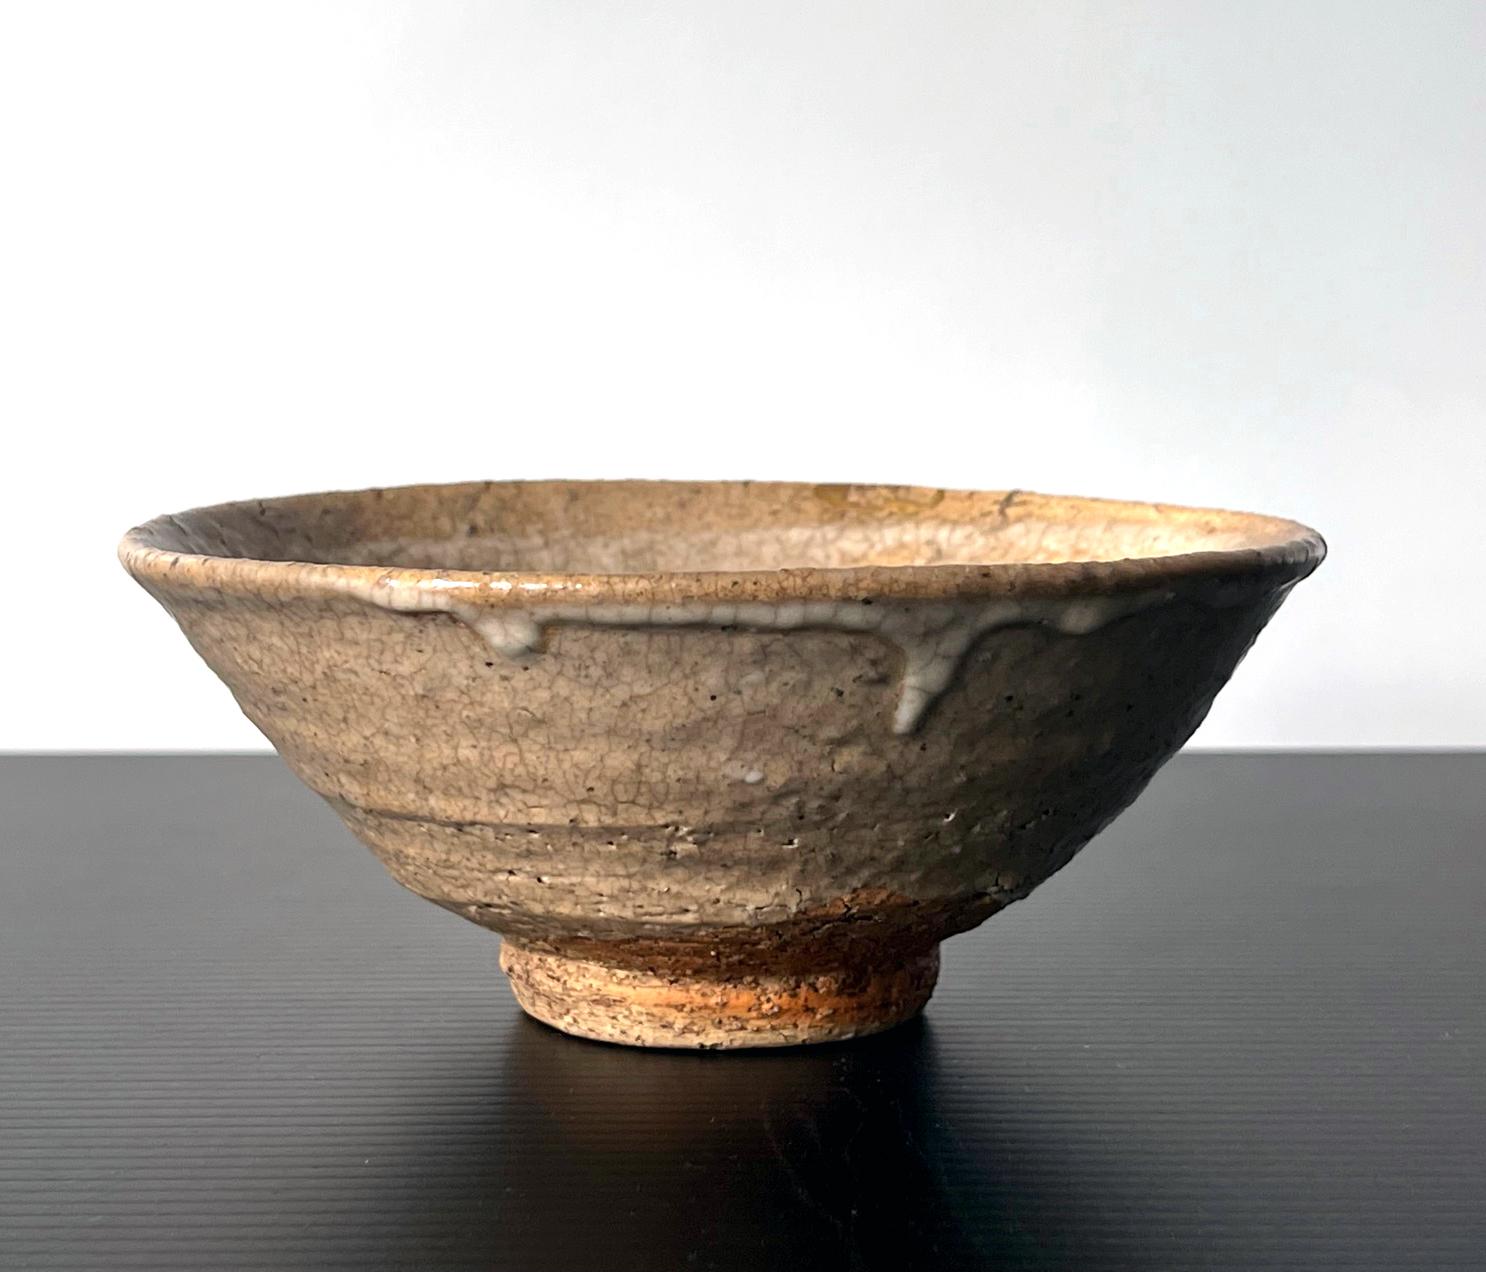 A ceramic stoneware chawan tea bowl made in Korea circa 16-17th century. The chawan is identified as Ko-ido (small ido) due to its size and form. Ido bowls were made since 15th century in Korea as everyday utensils for rice-eating and wine-drinking,